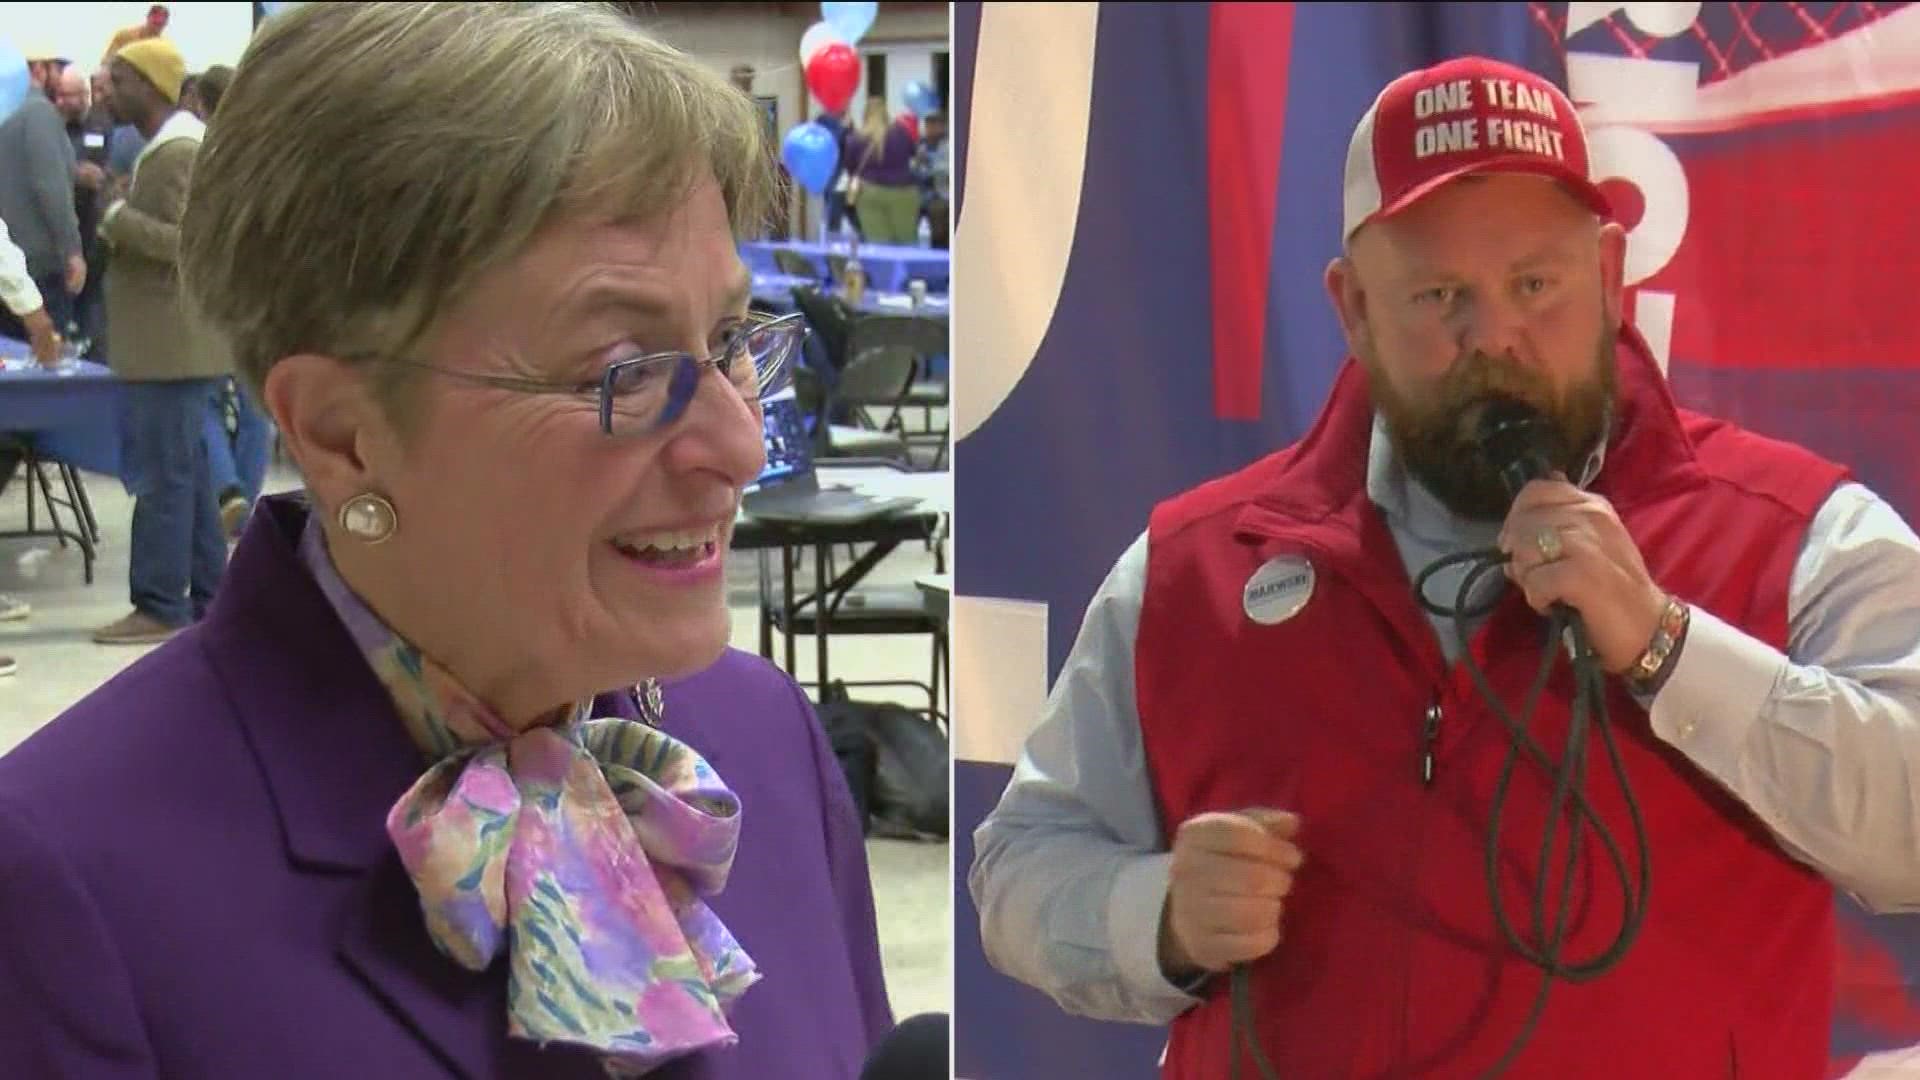 Our Kristy Gerlett breaks down the race results for Ohio 9th Congressional district seat.